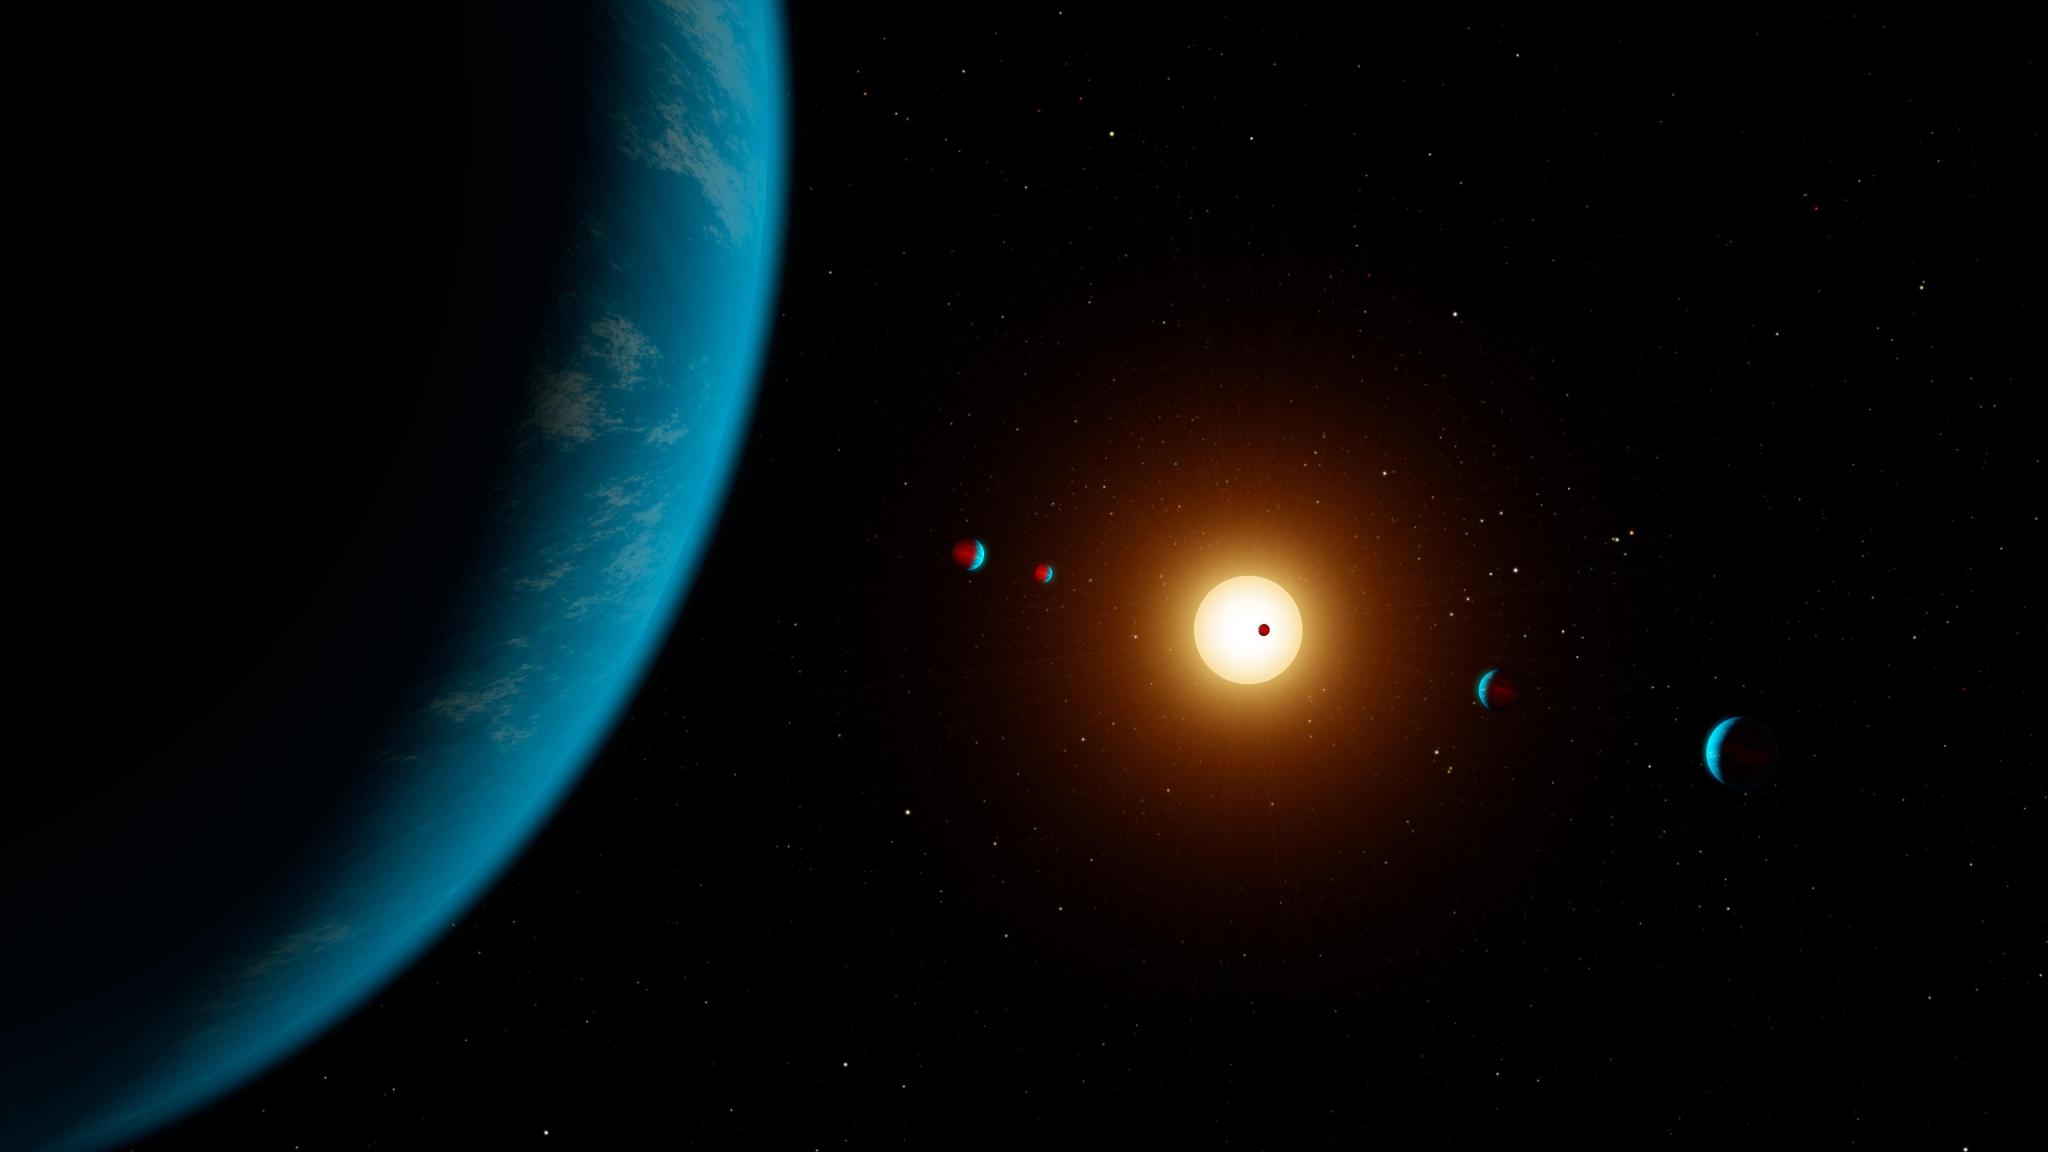 This artist's illustration shows the planetary system K2-138, which was discovered by citizen scientists in 2017 using data from NASA's Kepler space telescope.